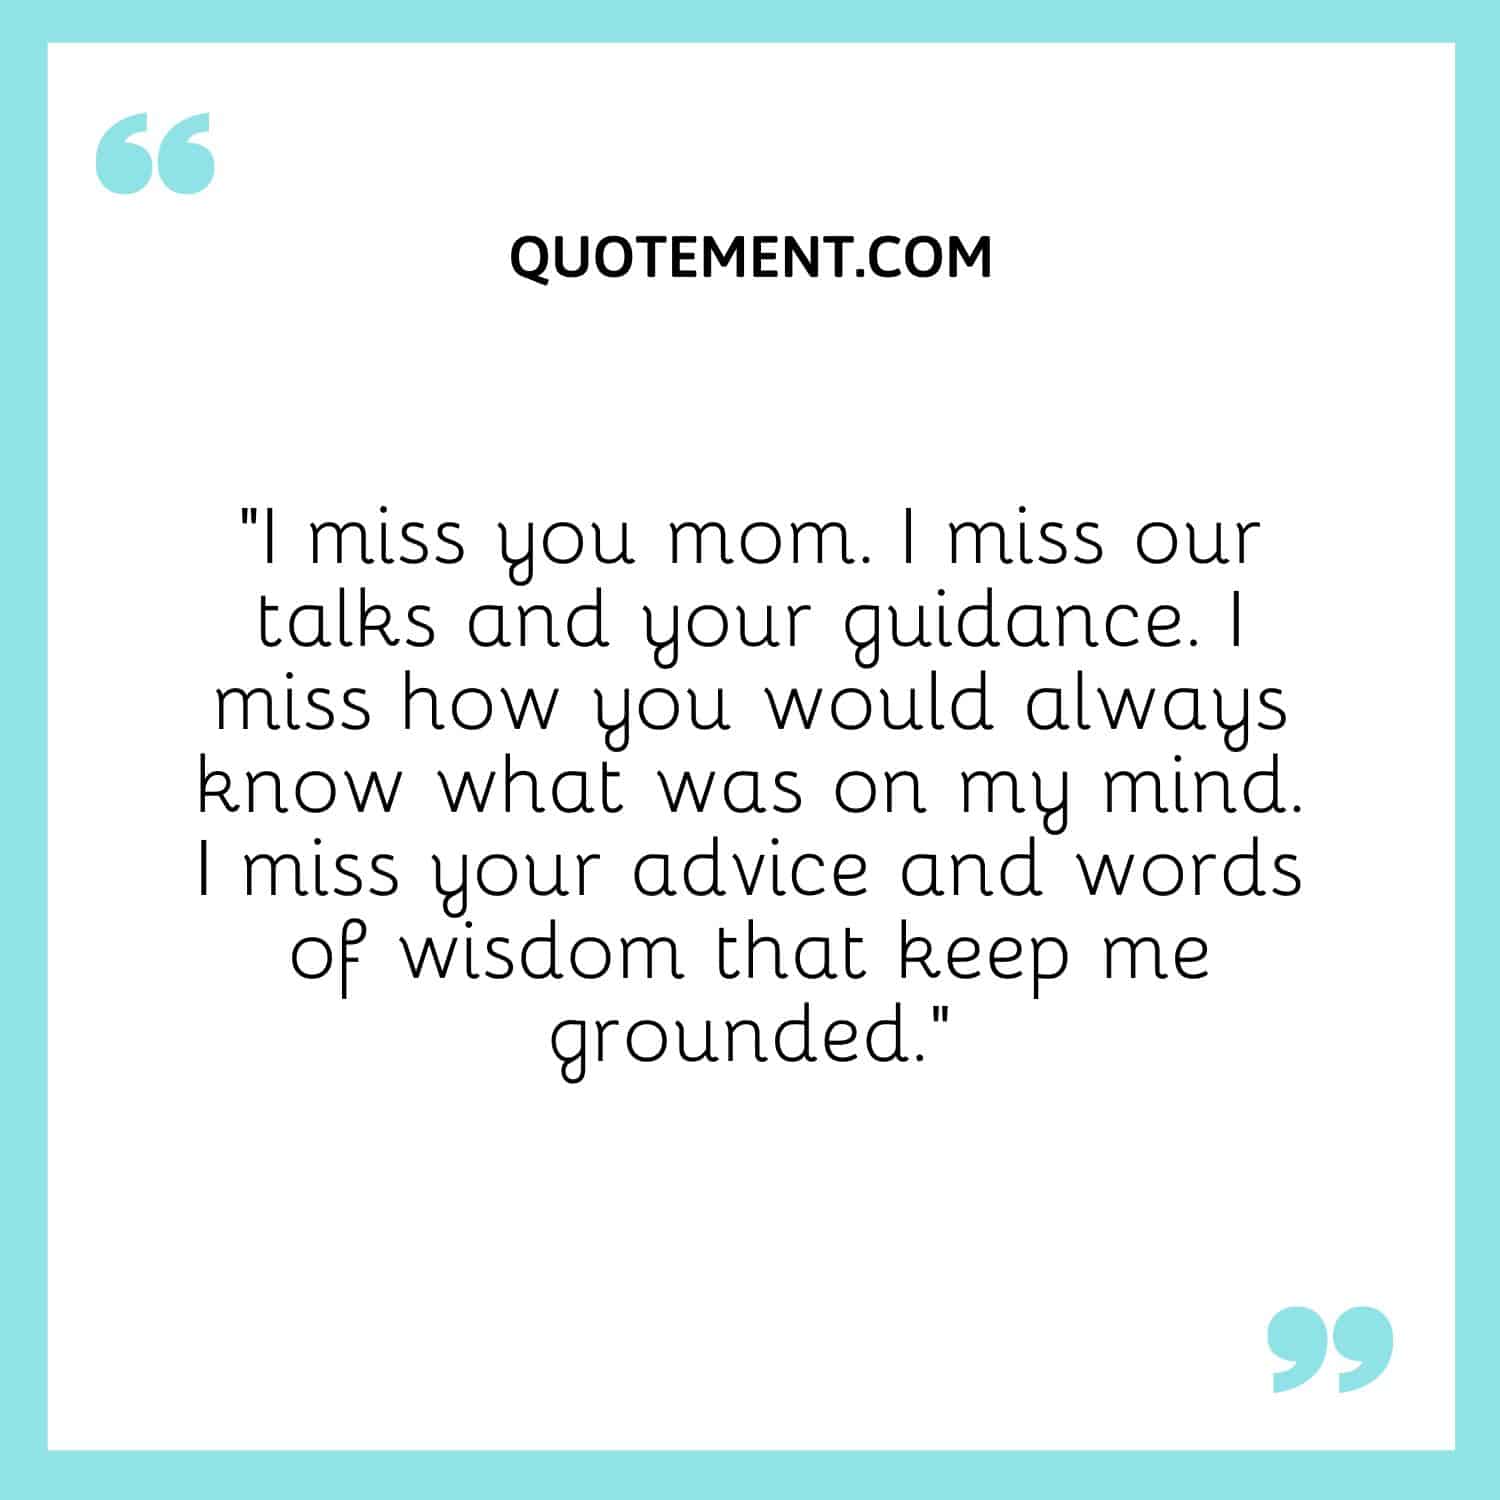 I miss you mom. I miss our talks and your guidance